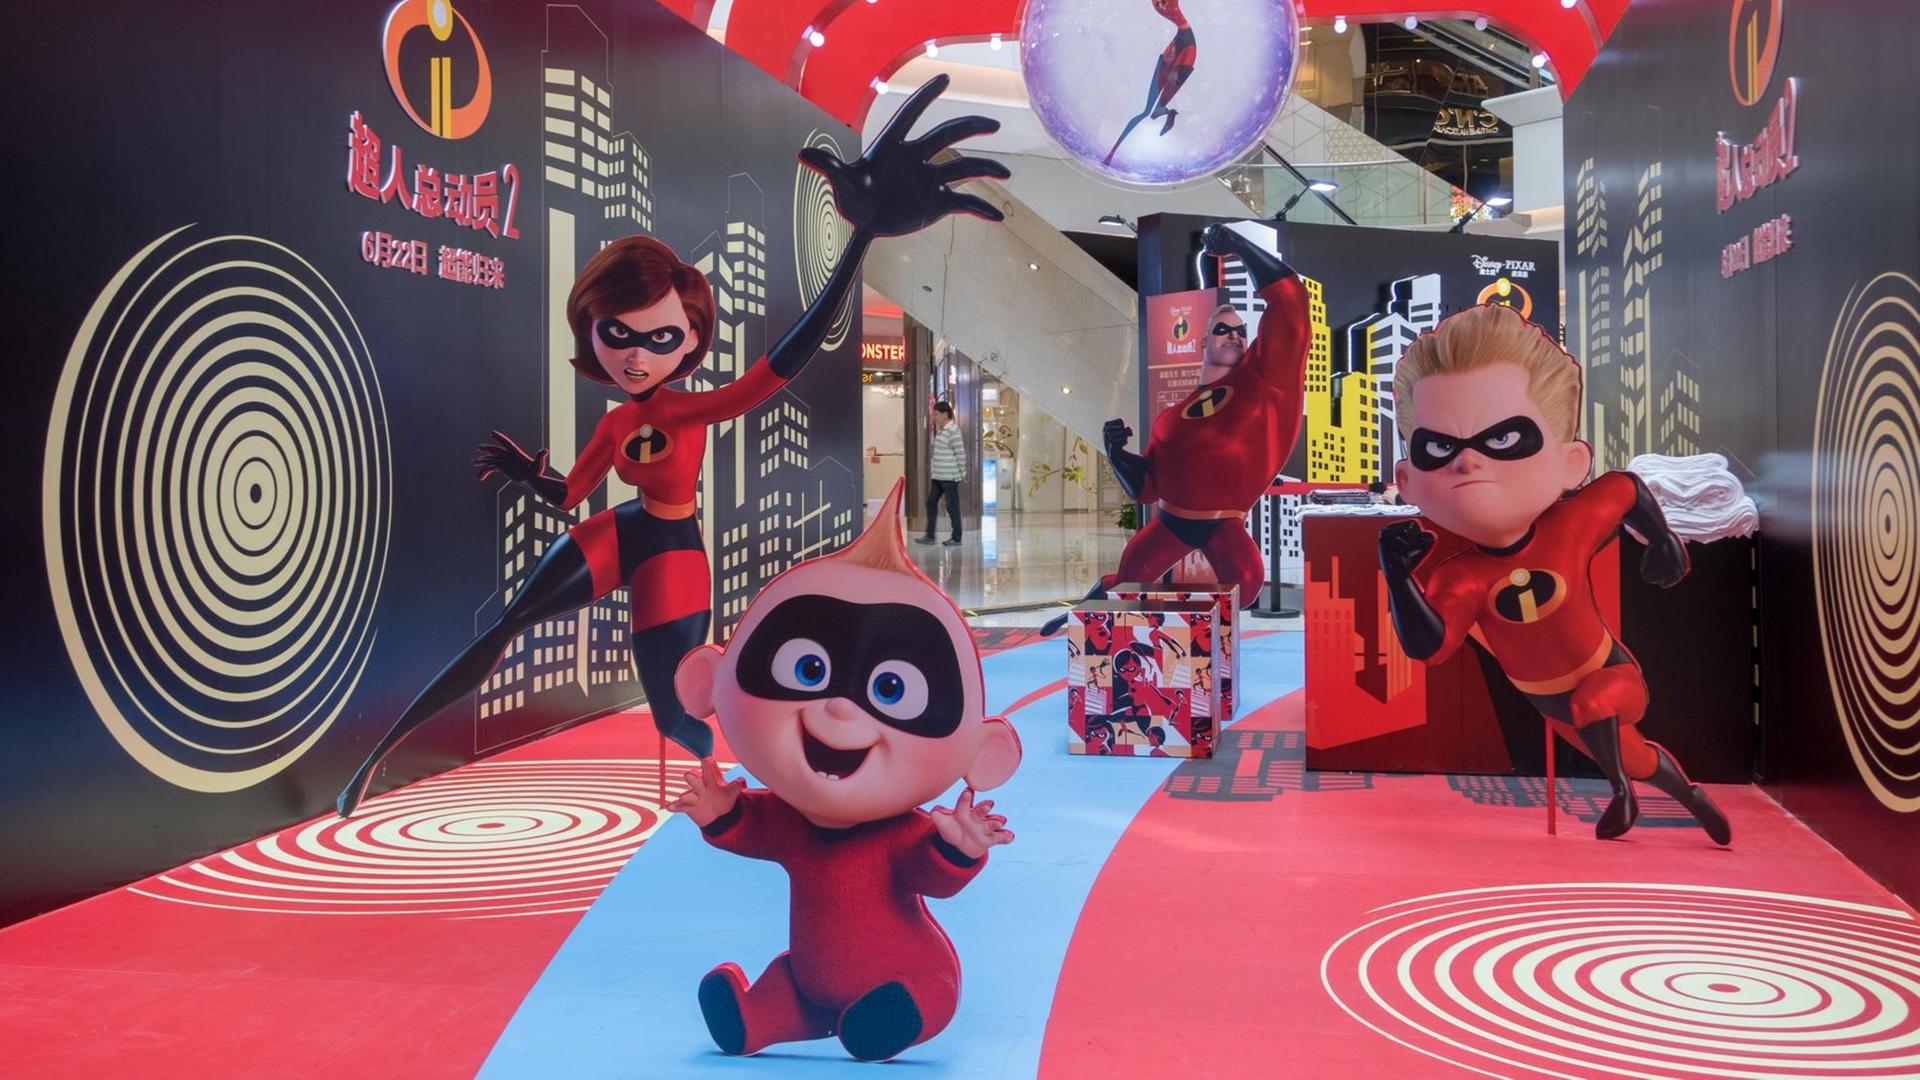 View of the exhibition on the theme of American 3D computer-animated superhero film "The Incredibles 2" to preheat the screening of the movie at a shopping mall in Shanghai, China, 4 June 2018. "The Incredibles 2," a highly anticipated sequel to the 2004 Oscar-winning animation, is slated for release in China on June 22. The American computer-animated superhero film will be released in both IMAX 3D and standard 3D versions. Its plot resumes where the first film ended, with the introduction of new villain The Underminer. Elements of action, adventure, comedy and suspense are blended together to create a film for the whole family. Pixar's new short film, "Bao," will also screen before the film in cinemas. Directed by Domee Shi, the short film revolves around an empty-nest Chinese mother who unexpectedly becomes the mother of her dumpling baby. Foto: Wang Gang/Imaginechina/dpa |